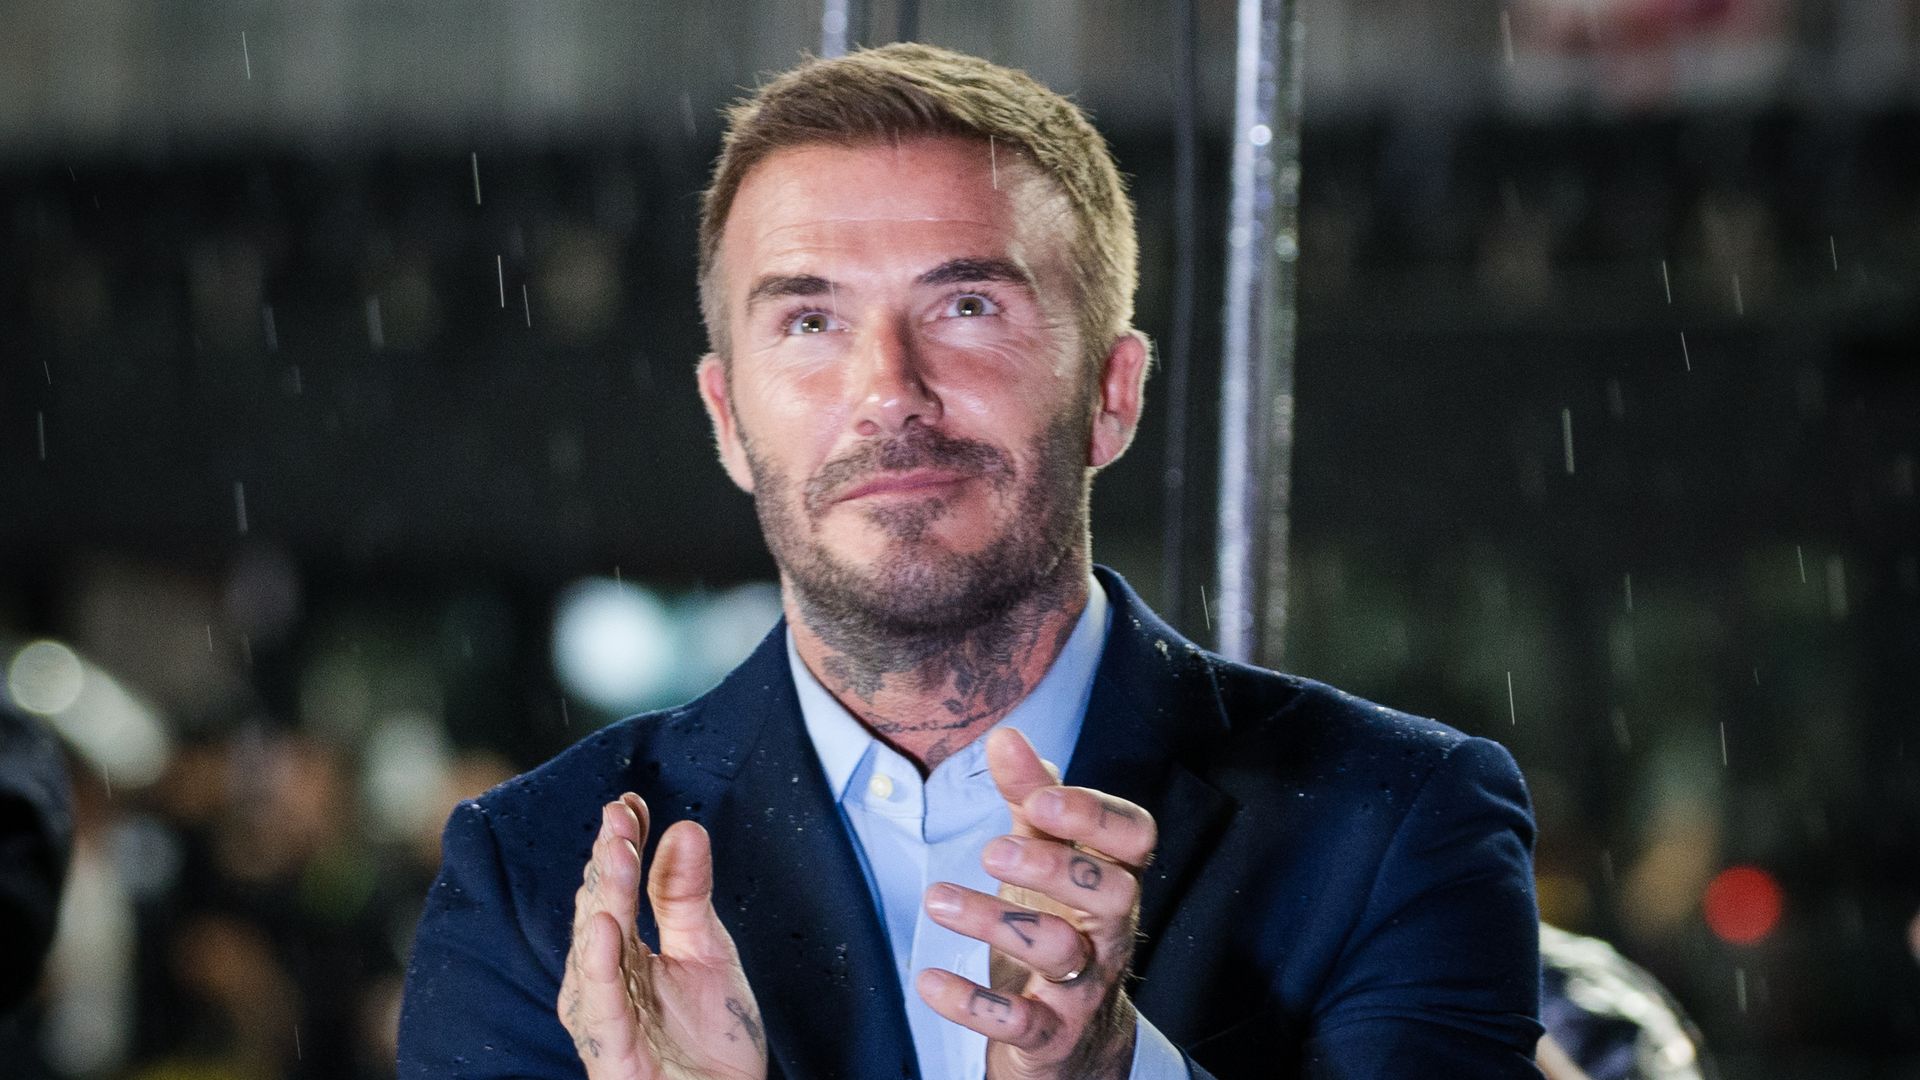 David Beckham clapping in a suit in the rain